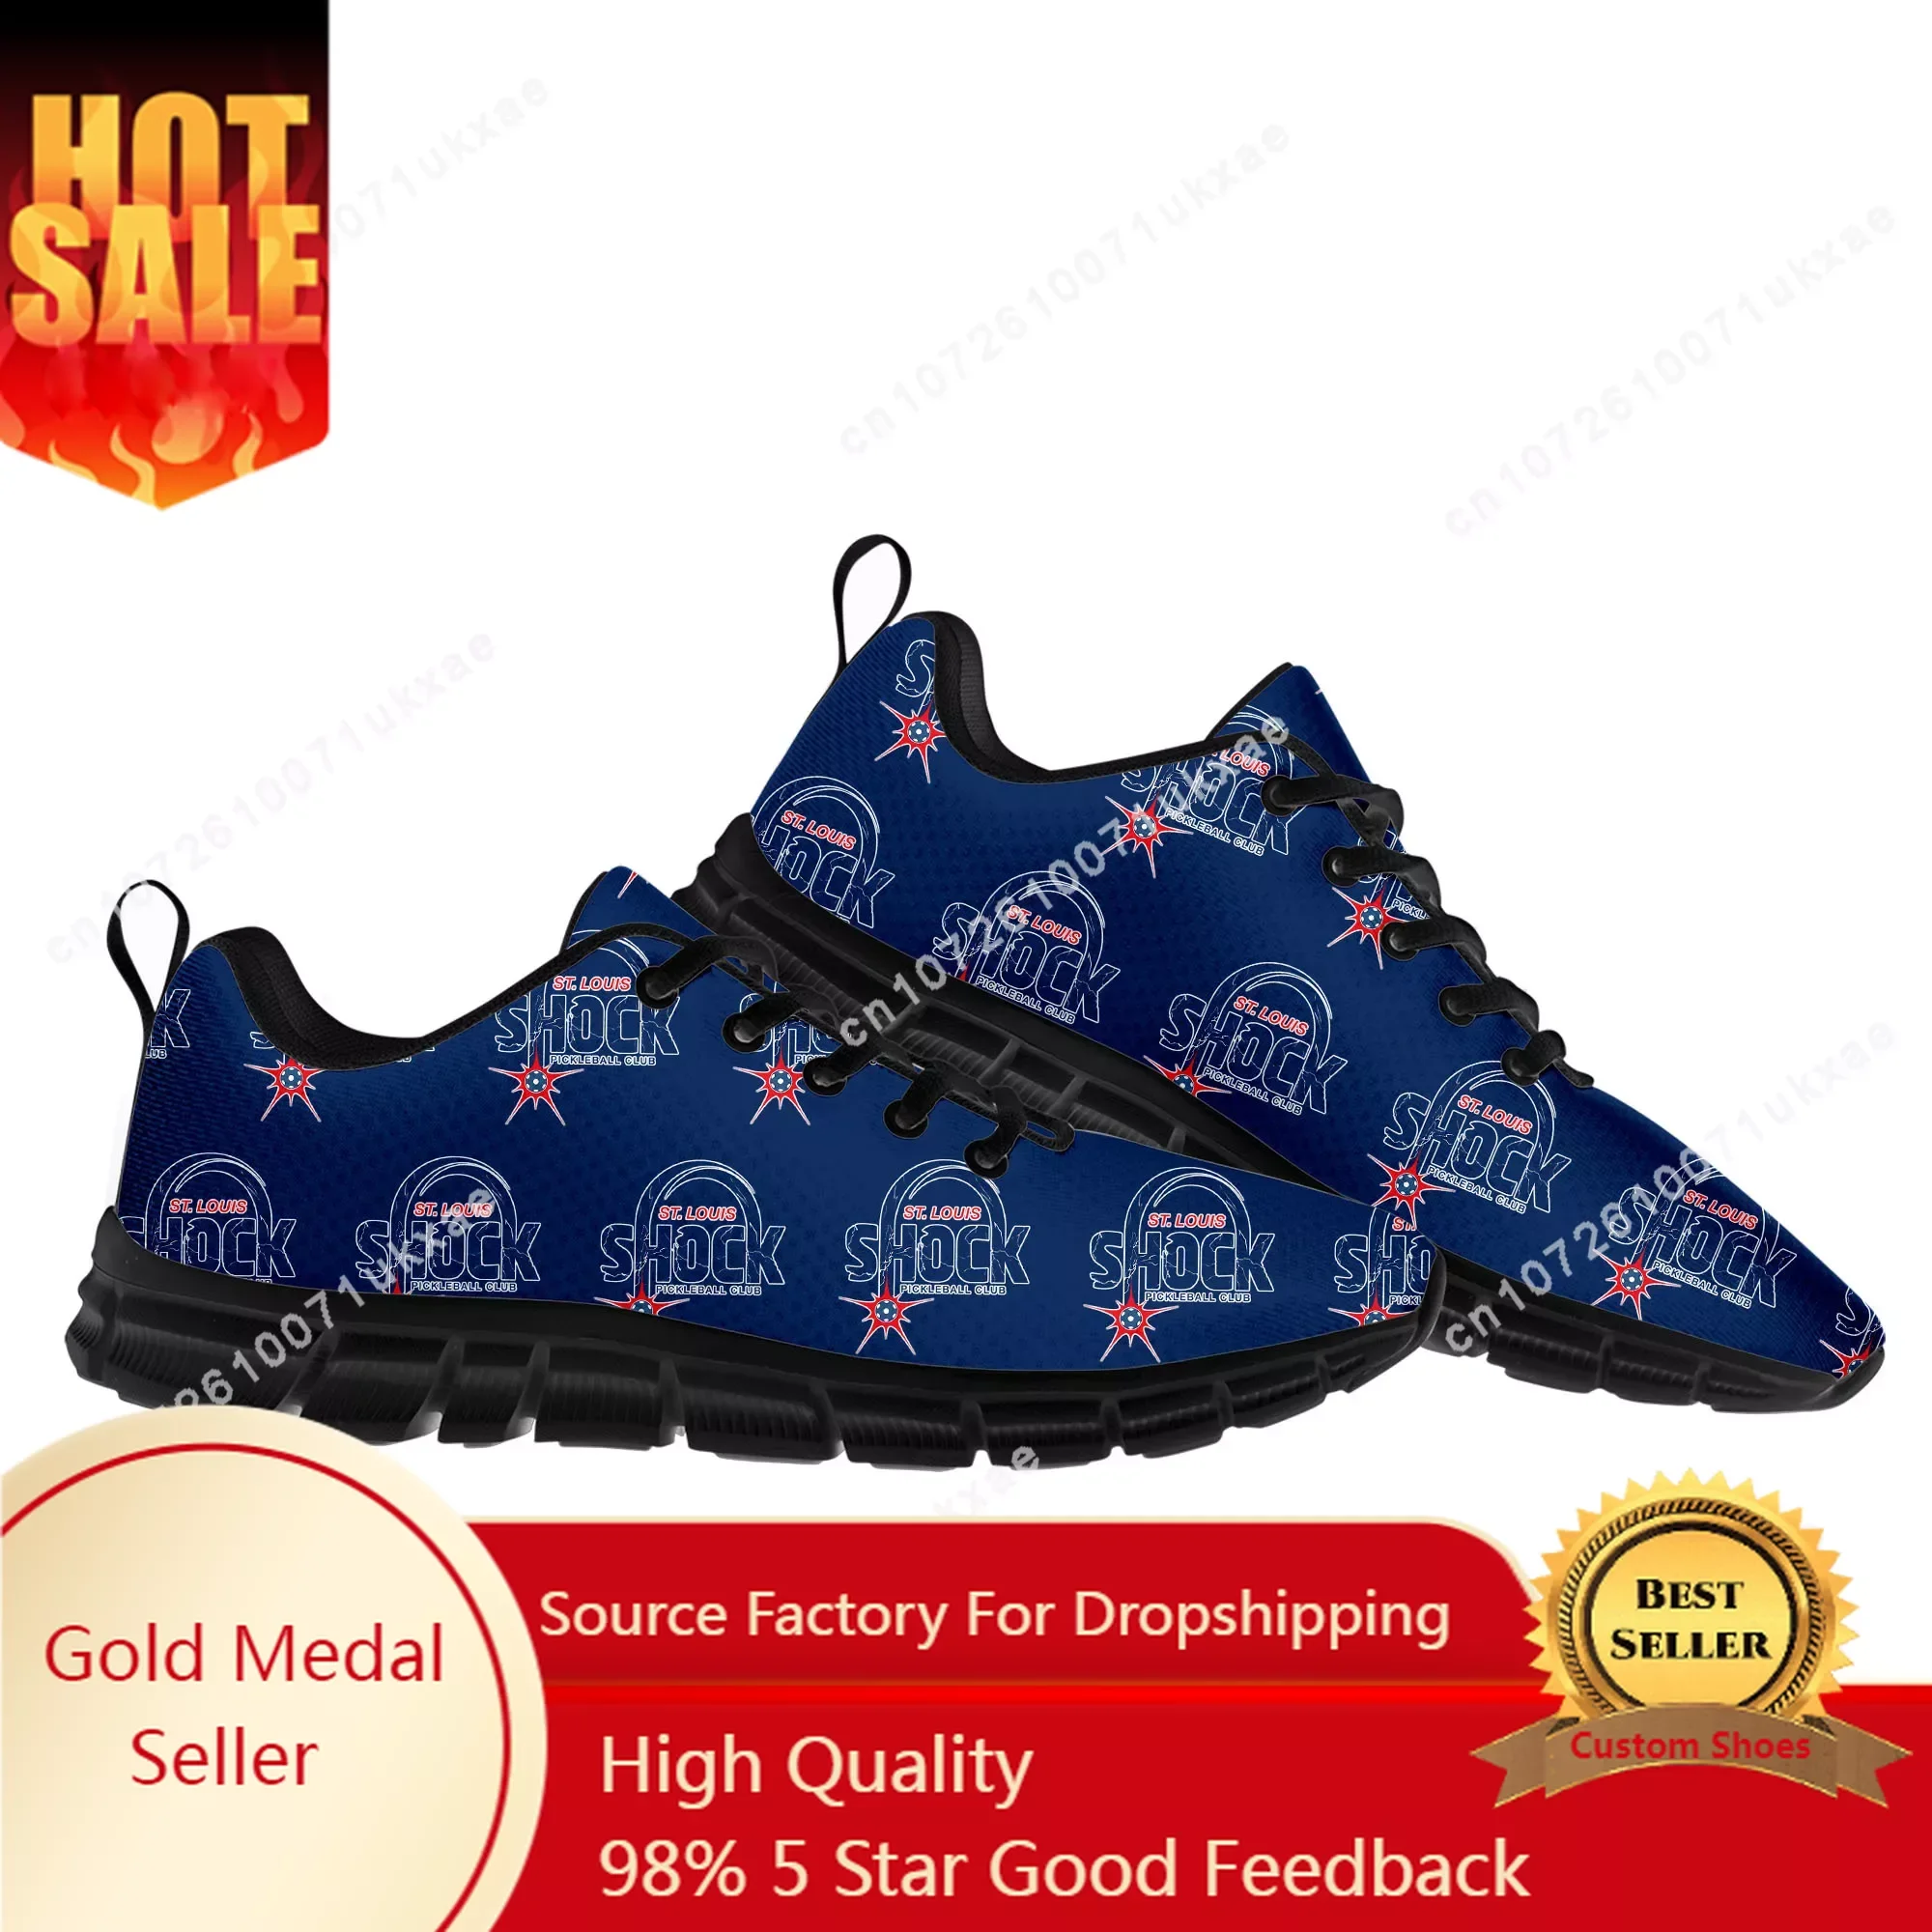 SHOCK pickleball Sports Shoes Mens Womens Teenager Kids Children Sneakers High Quality Parent Child Sneaker Customize DIY Shoe high quality winter kids sneakers girls shoes chunky sneaker children sports shoes for girl running child shoes chaussure enfant